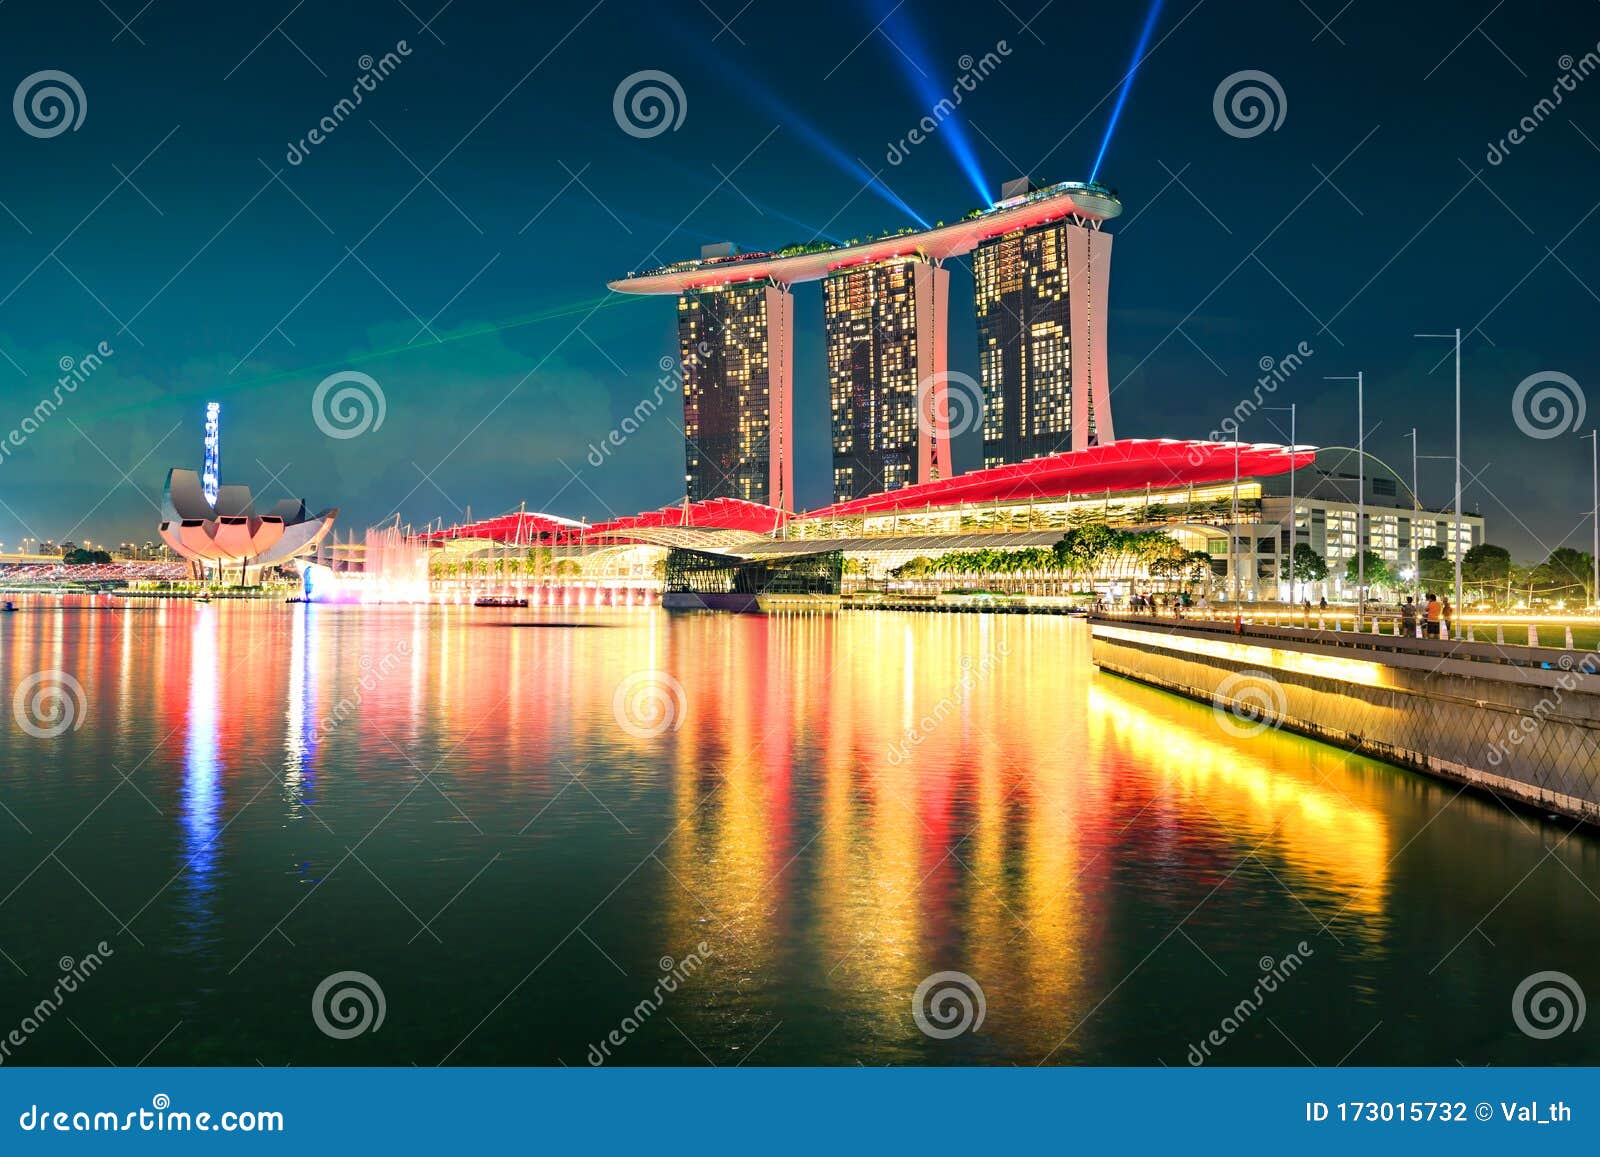 Marina Bay Sands Hotel of Singapore town by night, Singapore